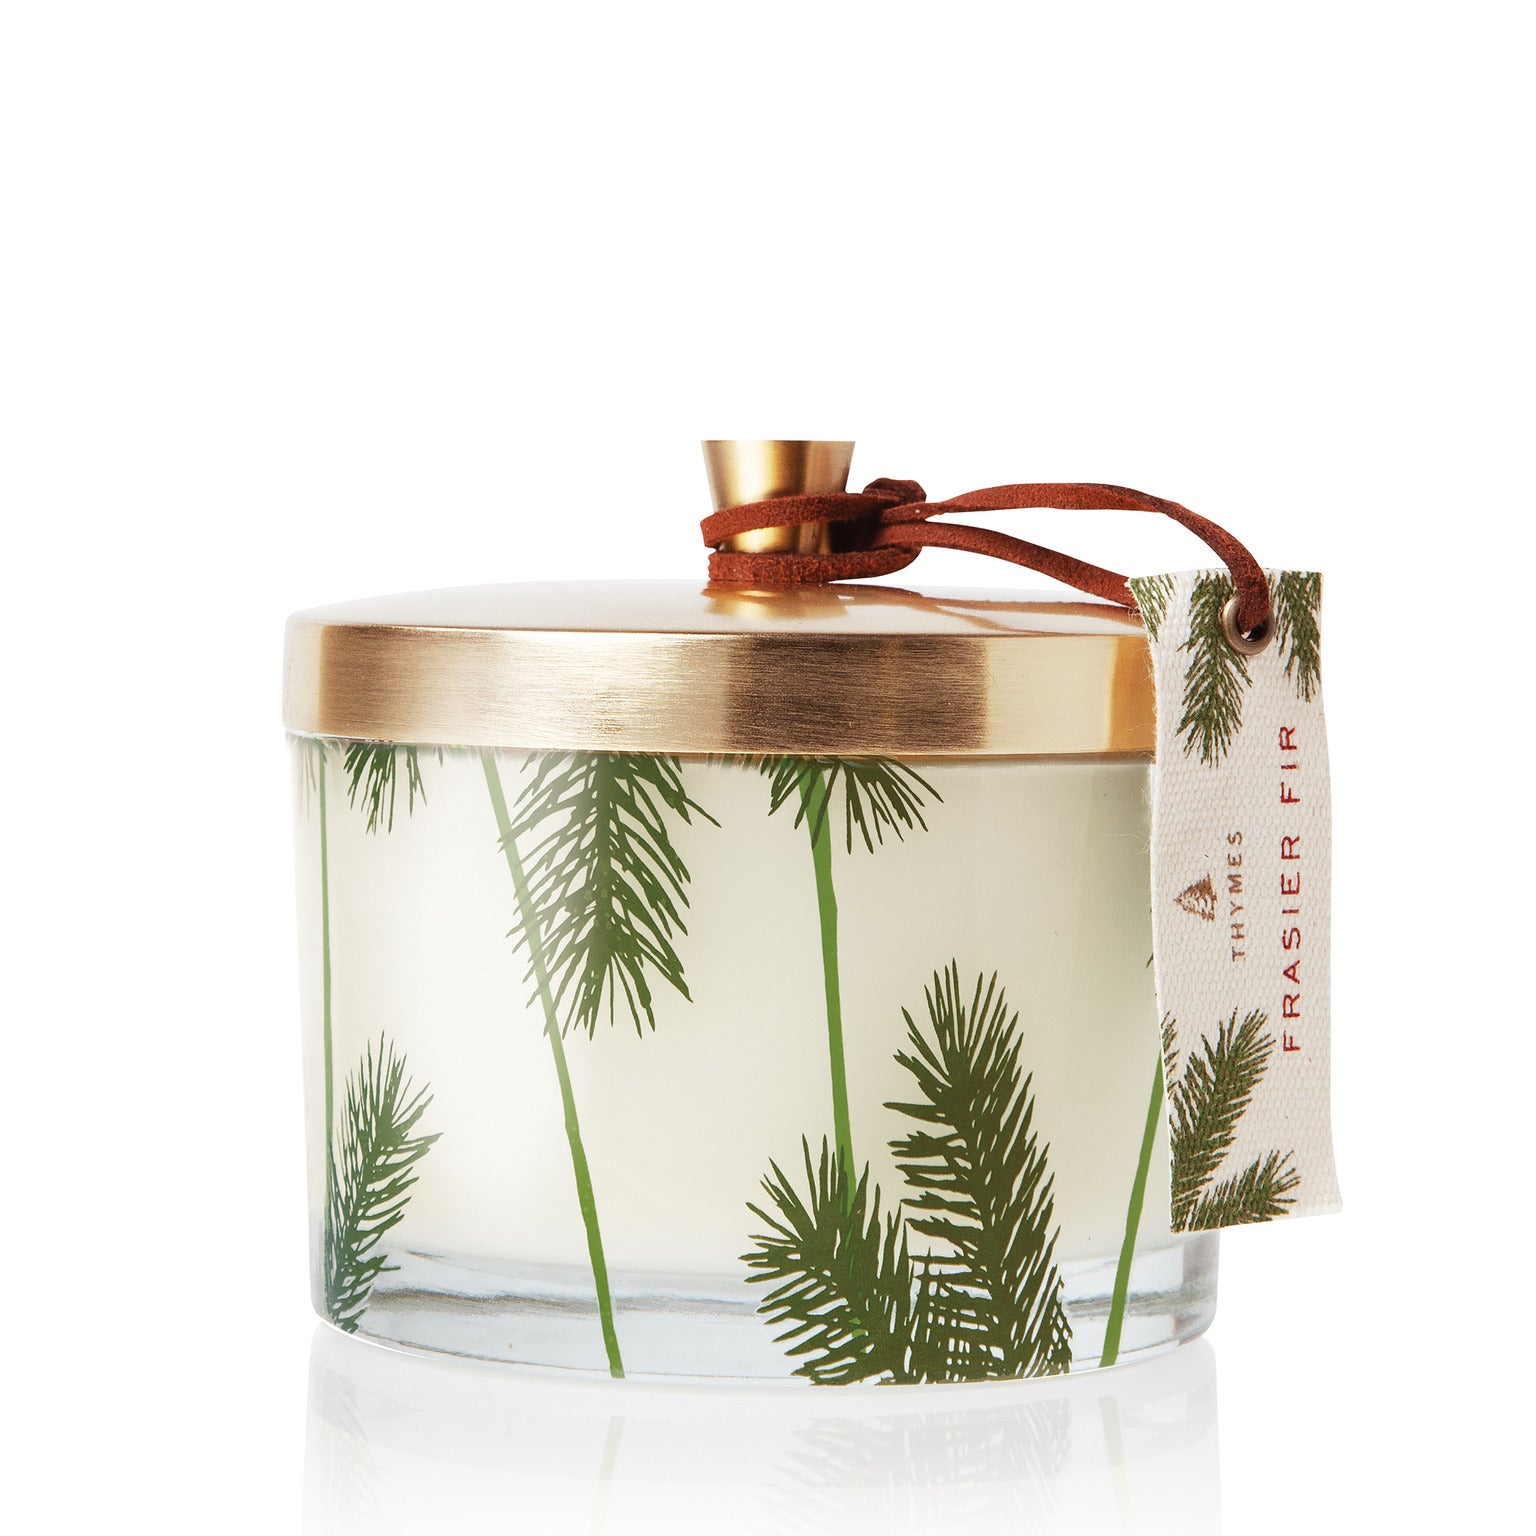 Thymes Frasier Fir Heritage Pine Needle Candle - Large 3 Wick